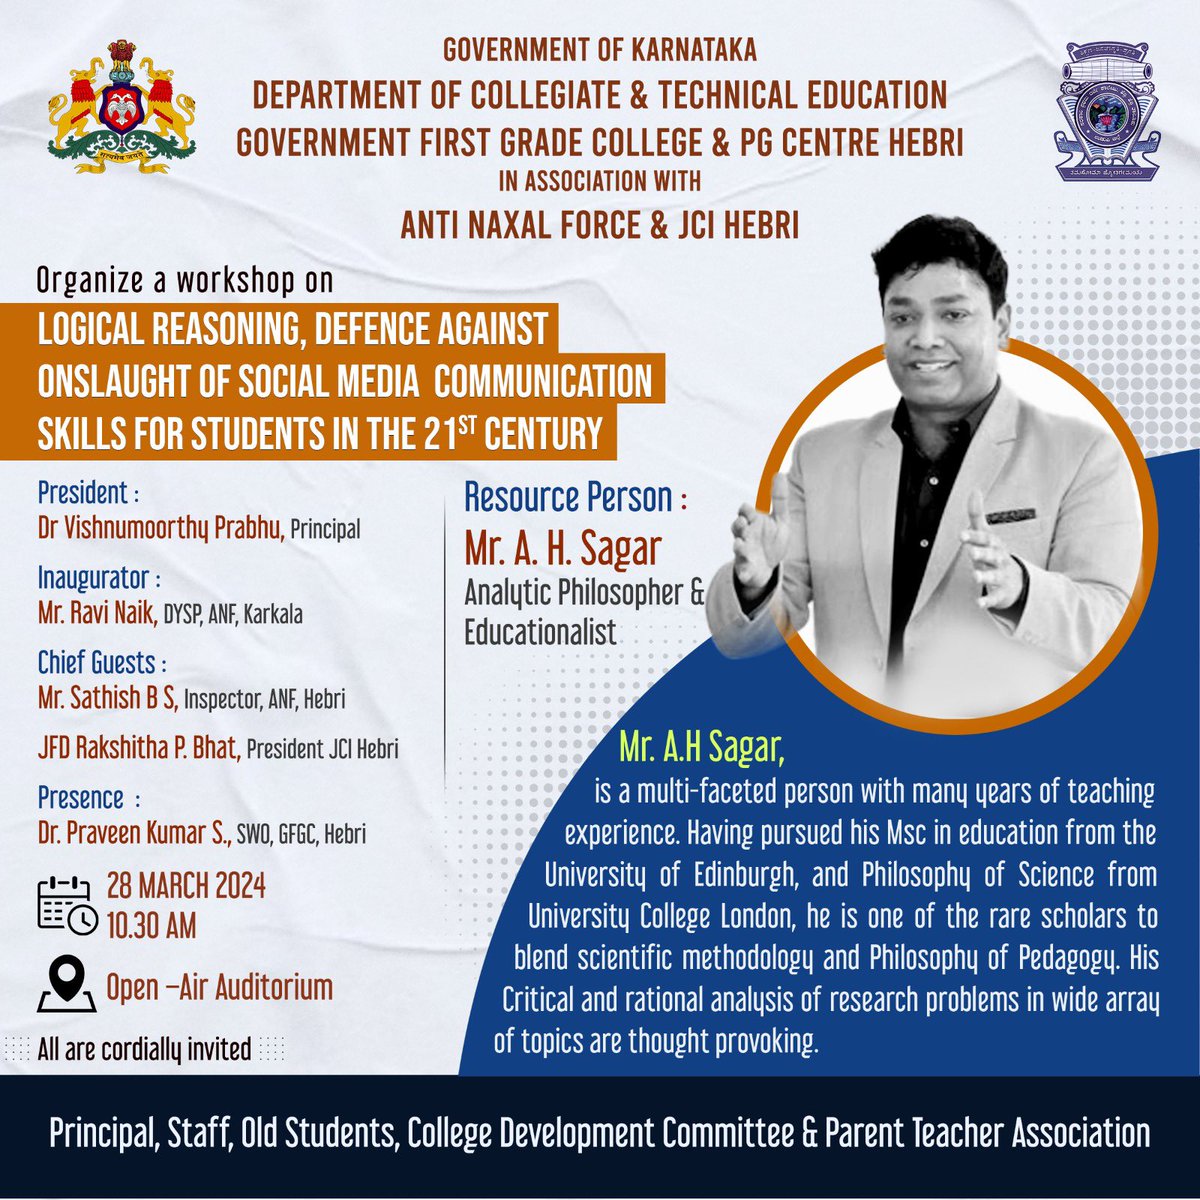 Tomorrow, I’ll be conducting an FDP from 9.30 to 11.00 am, and I’ll also address Students from GFGC Hebri and other Neighbouring Colleges at Govt First Grade College & Postgraduate Centre, Hebri in association with Anti Naxal Force & JCI Hebri.

#sagarahearthling #sagarah  #gfgc